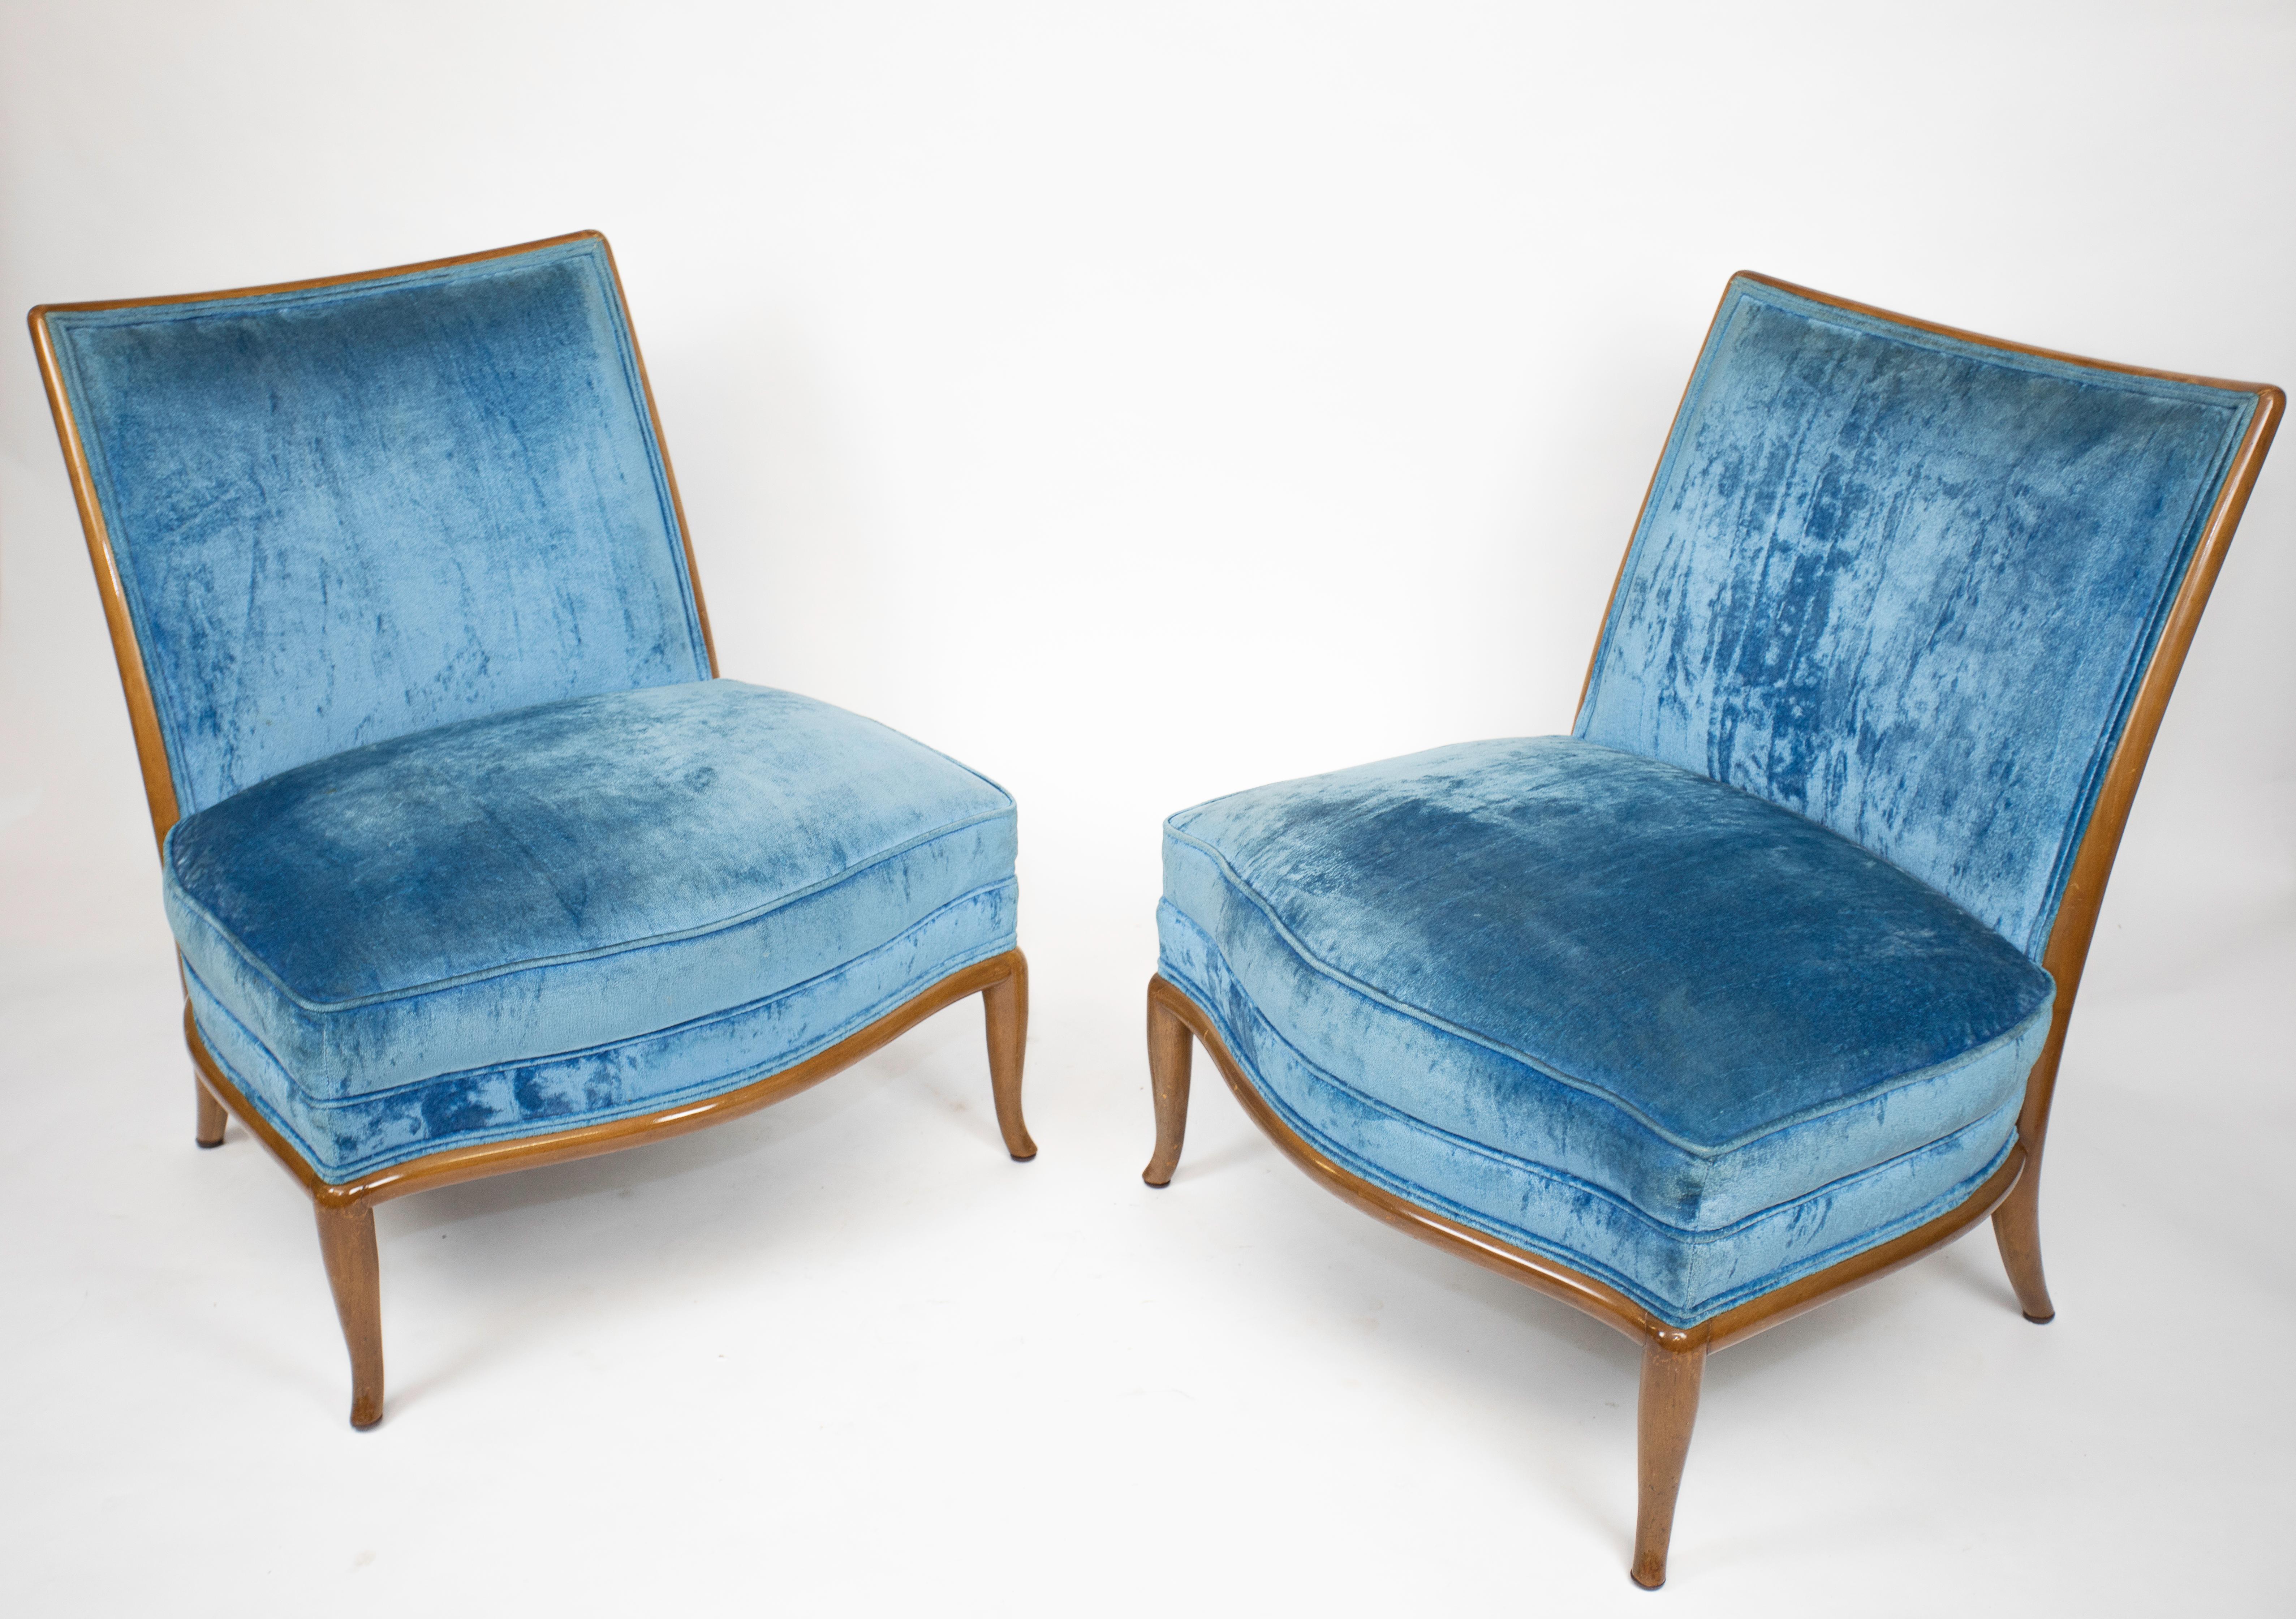 Pair of oversized Saber-legged lounge chairs by Robsjohn-Gibbings.
Reupholstered well (years ago).